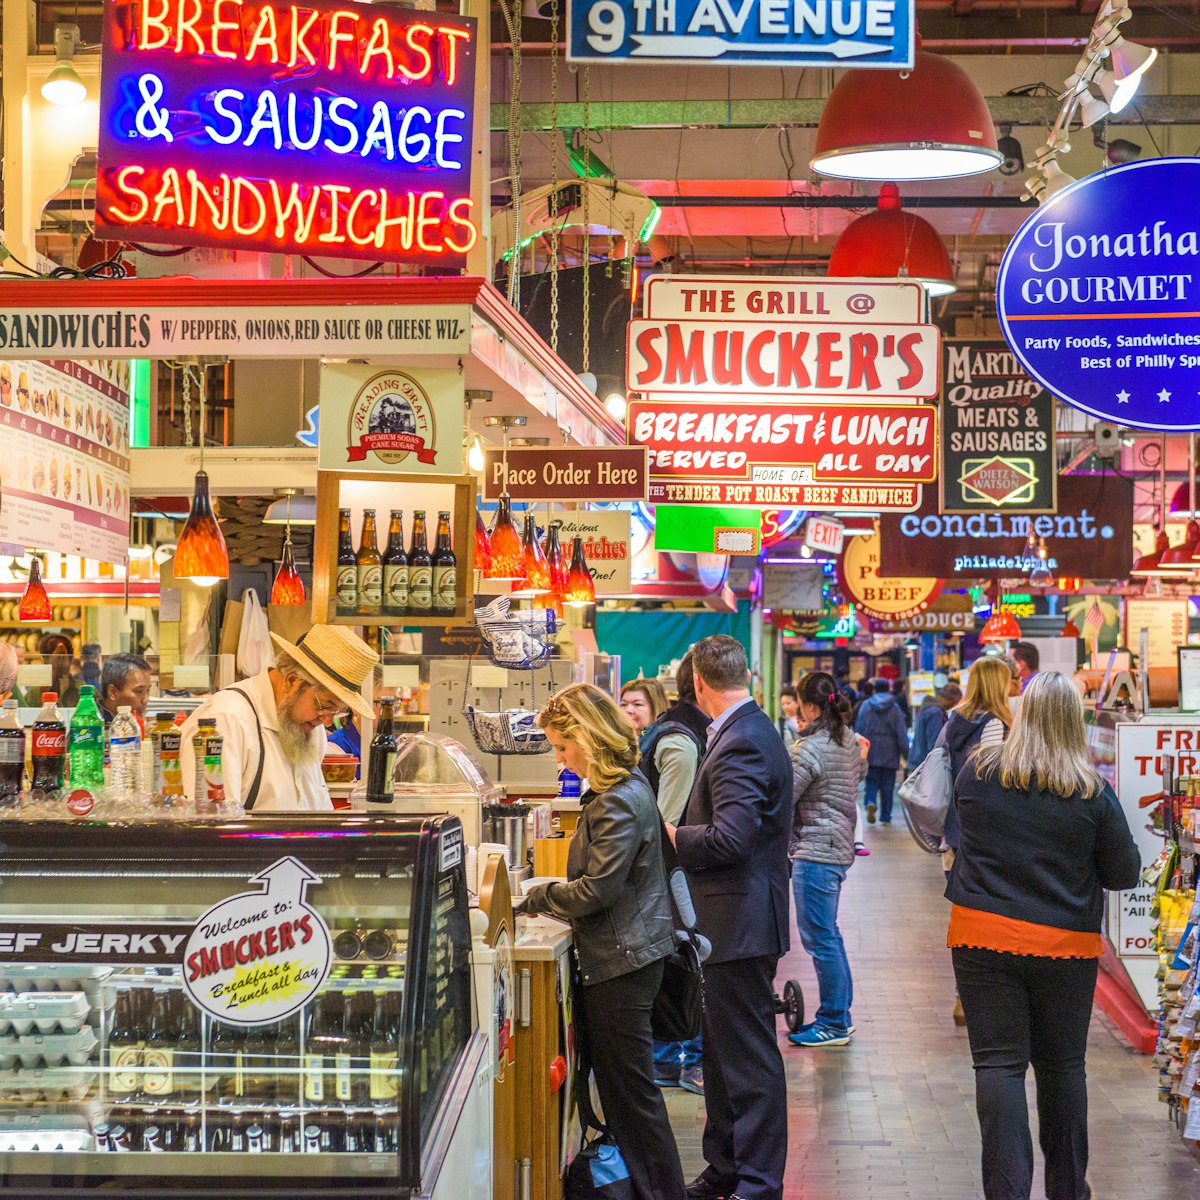 NOVEMBER 18, 2016: customers shopping at the Reading Terminal Market.
1143691526
aisle, america, american, attraction, city, crowd, cuisine, culinary, culture, customers, deli, destination, famous, food, grocery, hall, historic, historical, indoors, inside, landmark, market, marketplace, pa, pennsylvania, people, philadelphia, philly, place, reading, sandwiches, scene, scenery, scenic, shop, sightseeing, snacks, stalls, states, store, street, terminal, tourist, traditional, travel, united, urban, usa, vendor, view